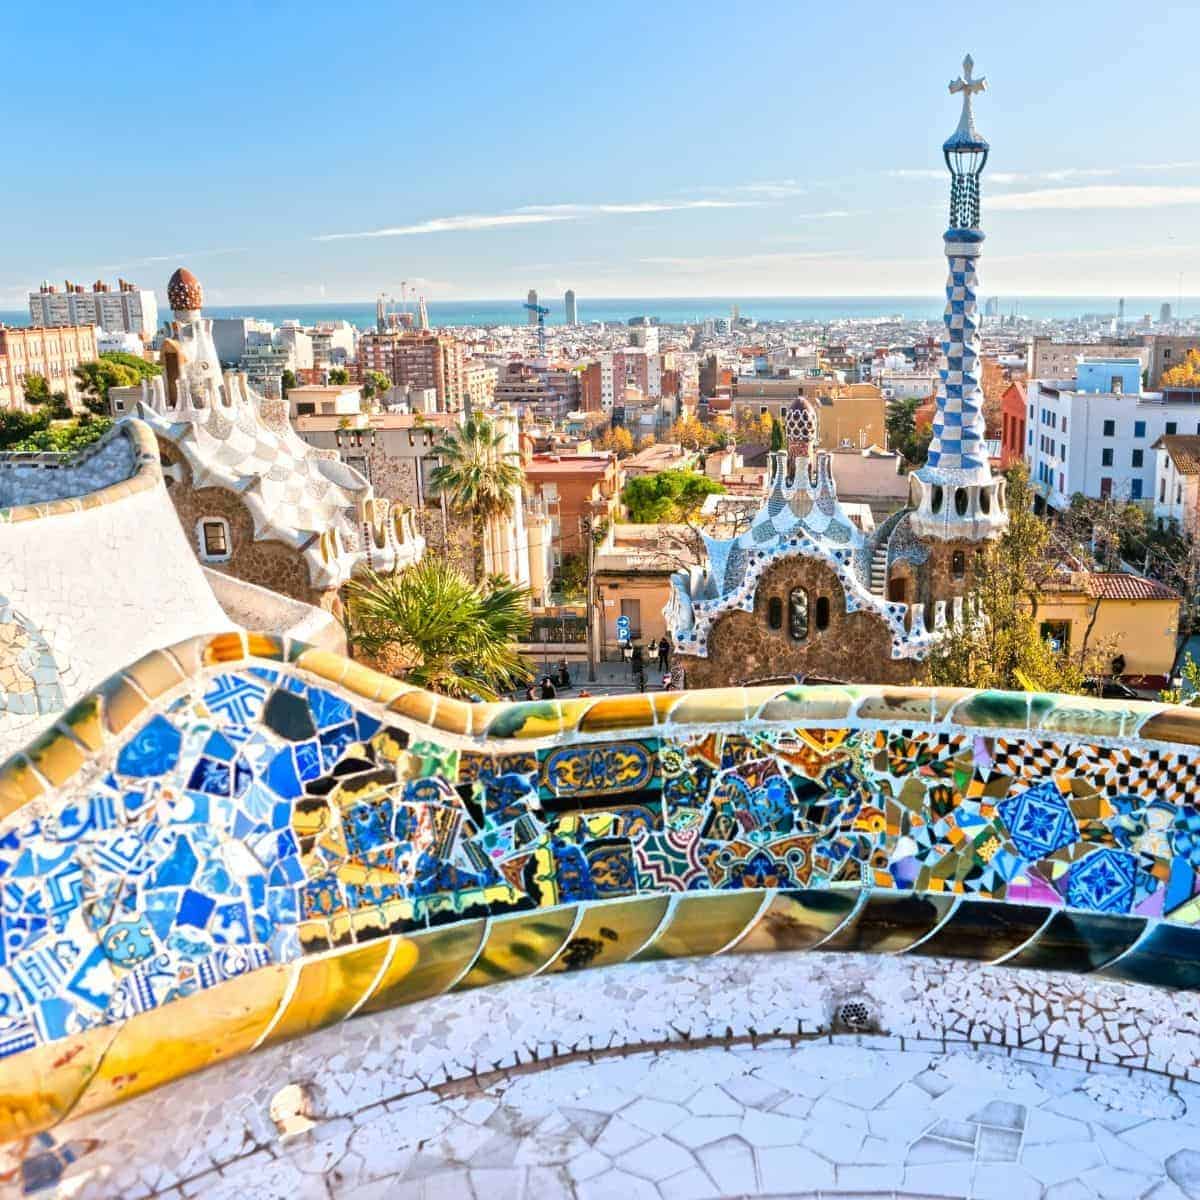 View of Barcelona, Spain from a rooftop.